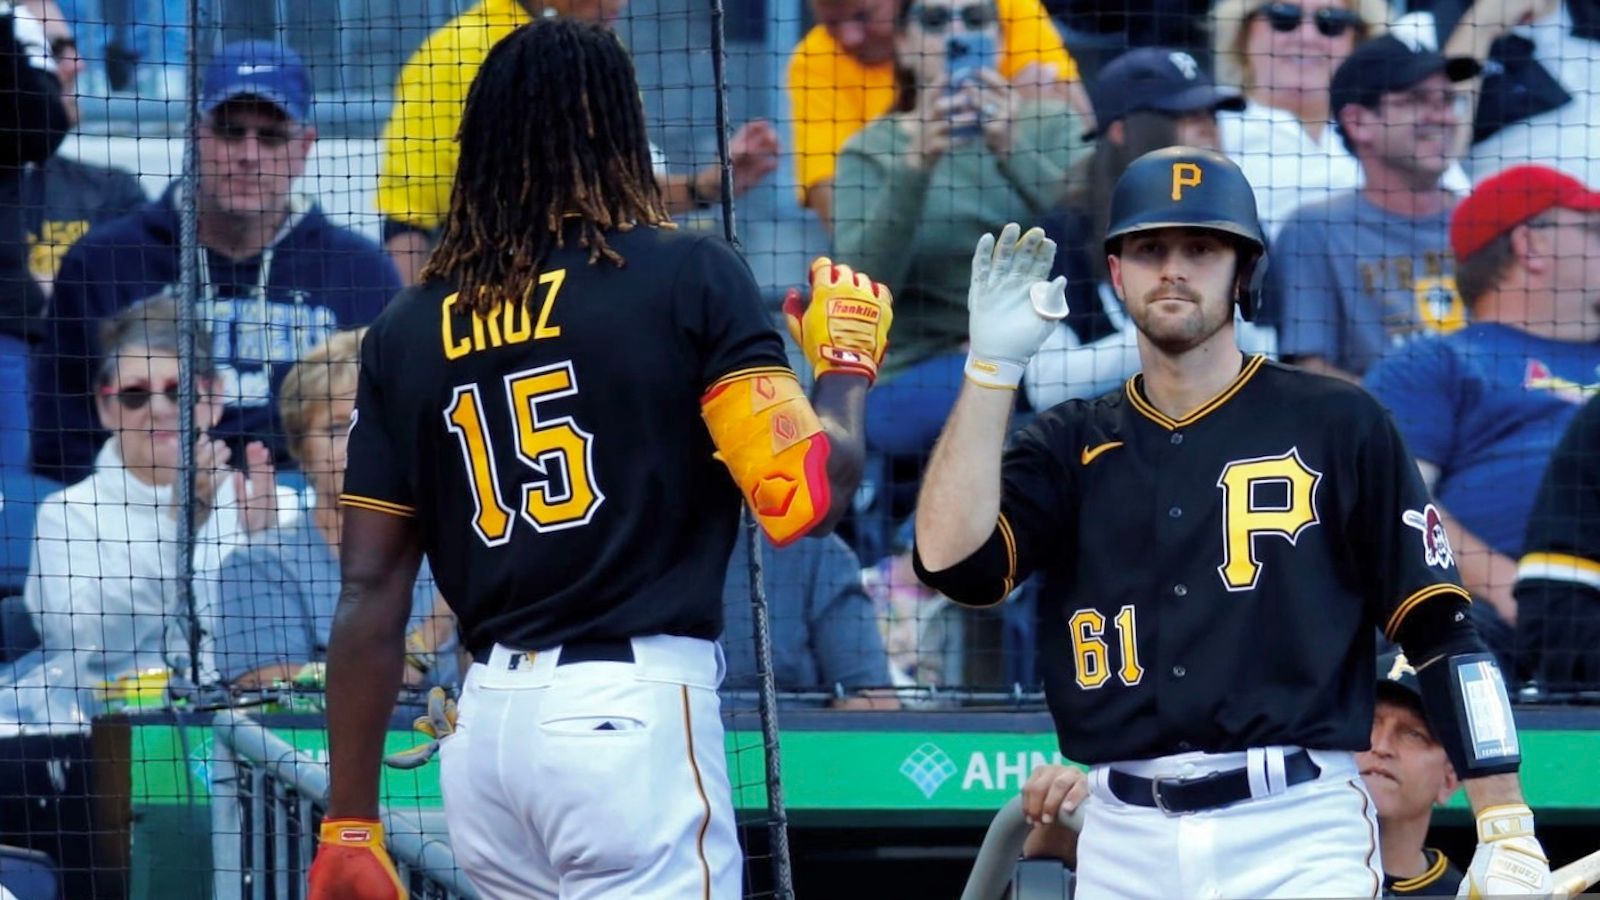 Pirates 2022 offseason questions